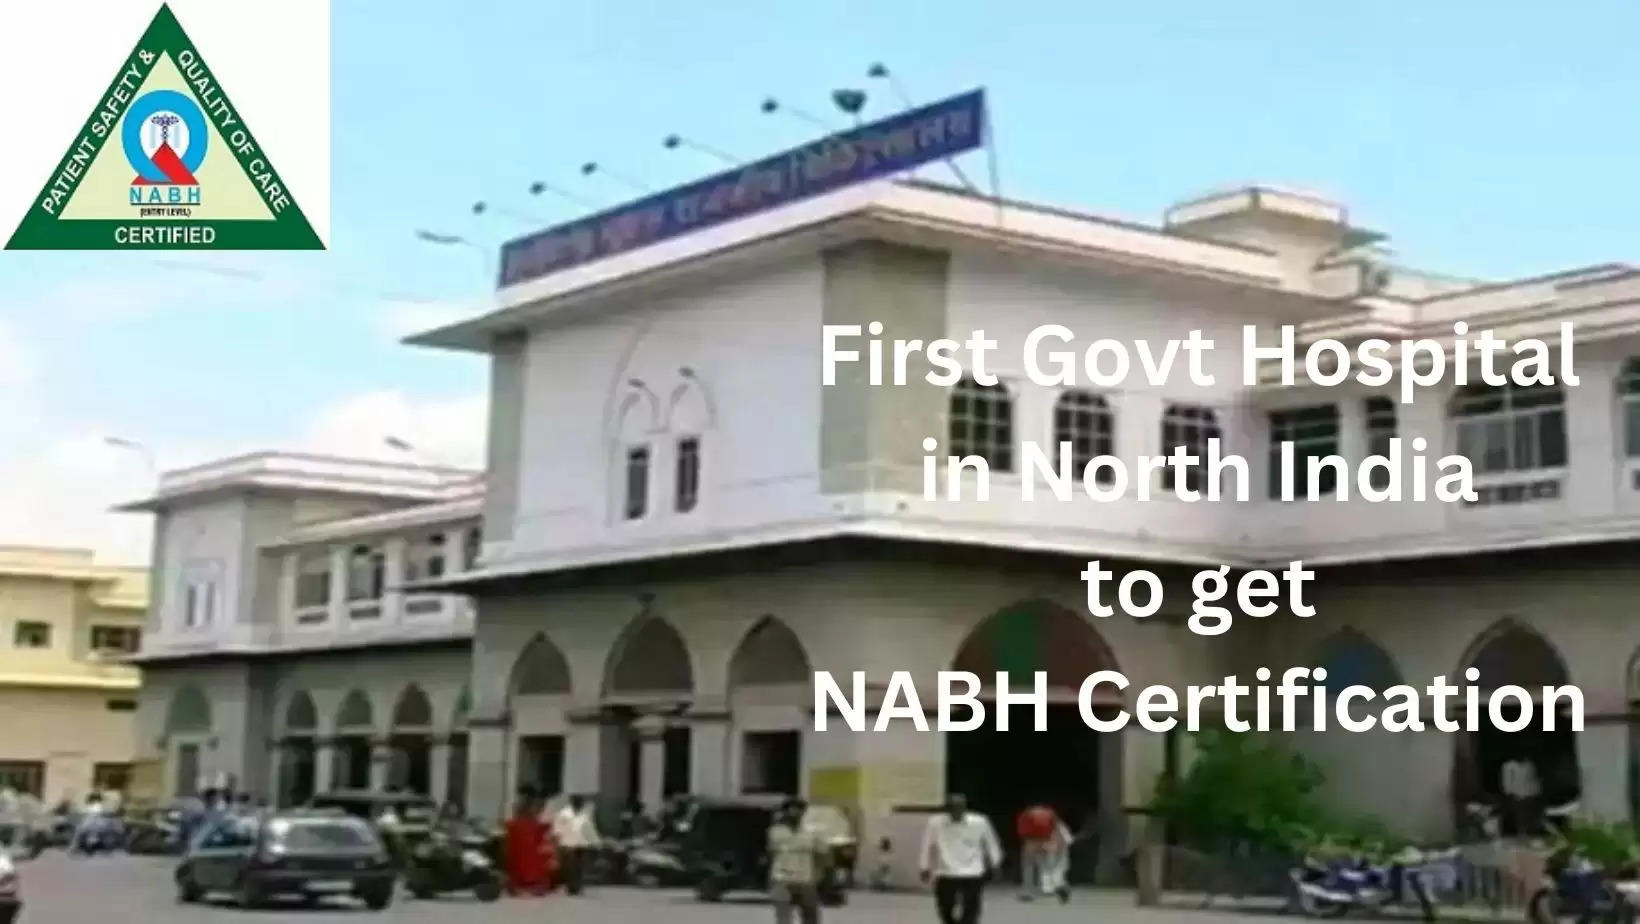 NABH Certification for MB Hospital Udaipur, First Government Hospital in North India to get NABH Certification